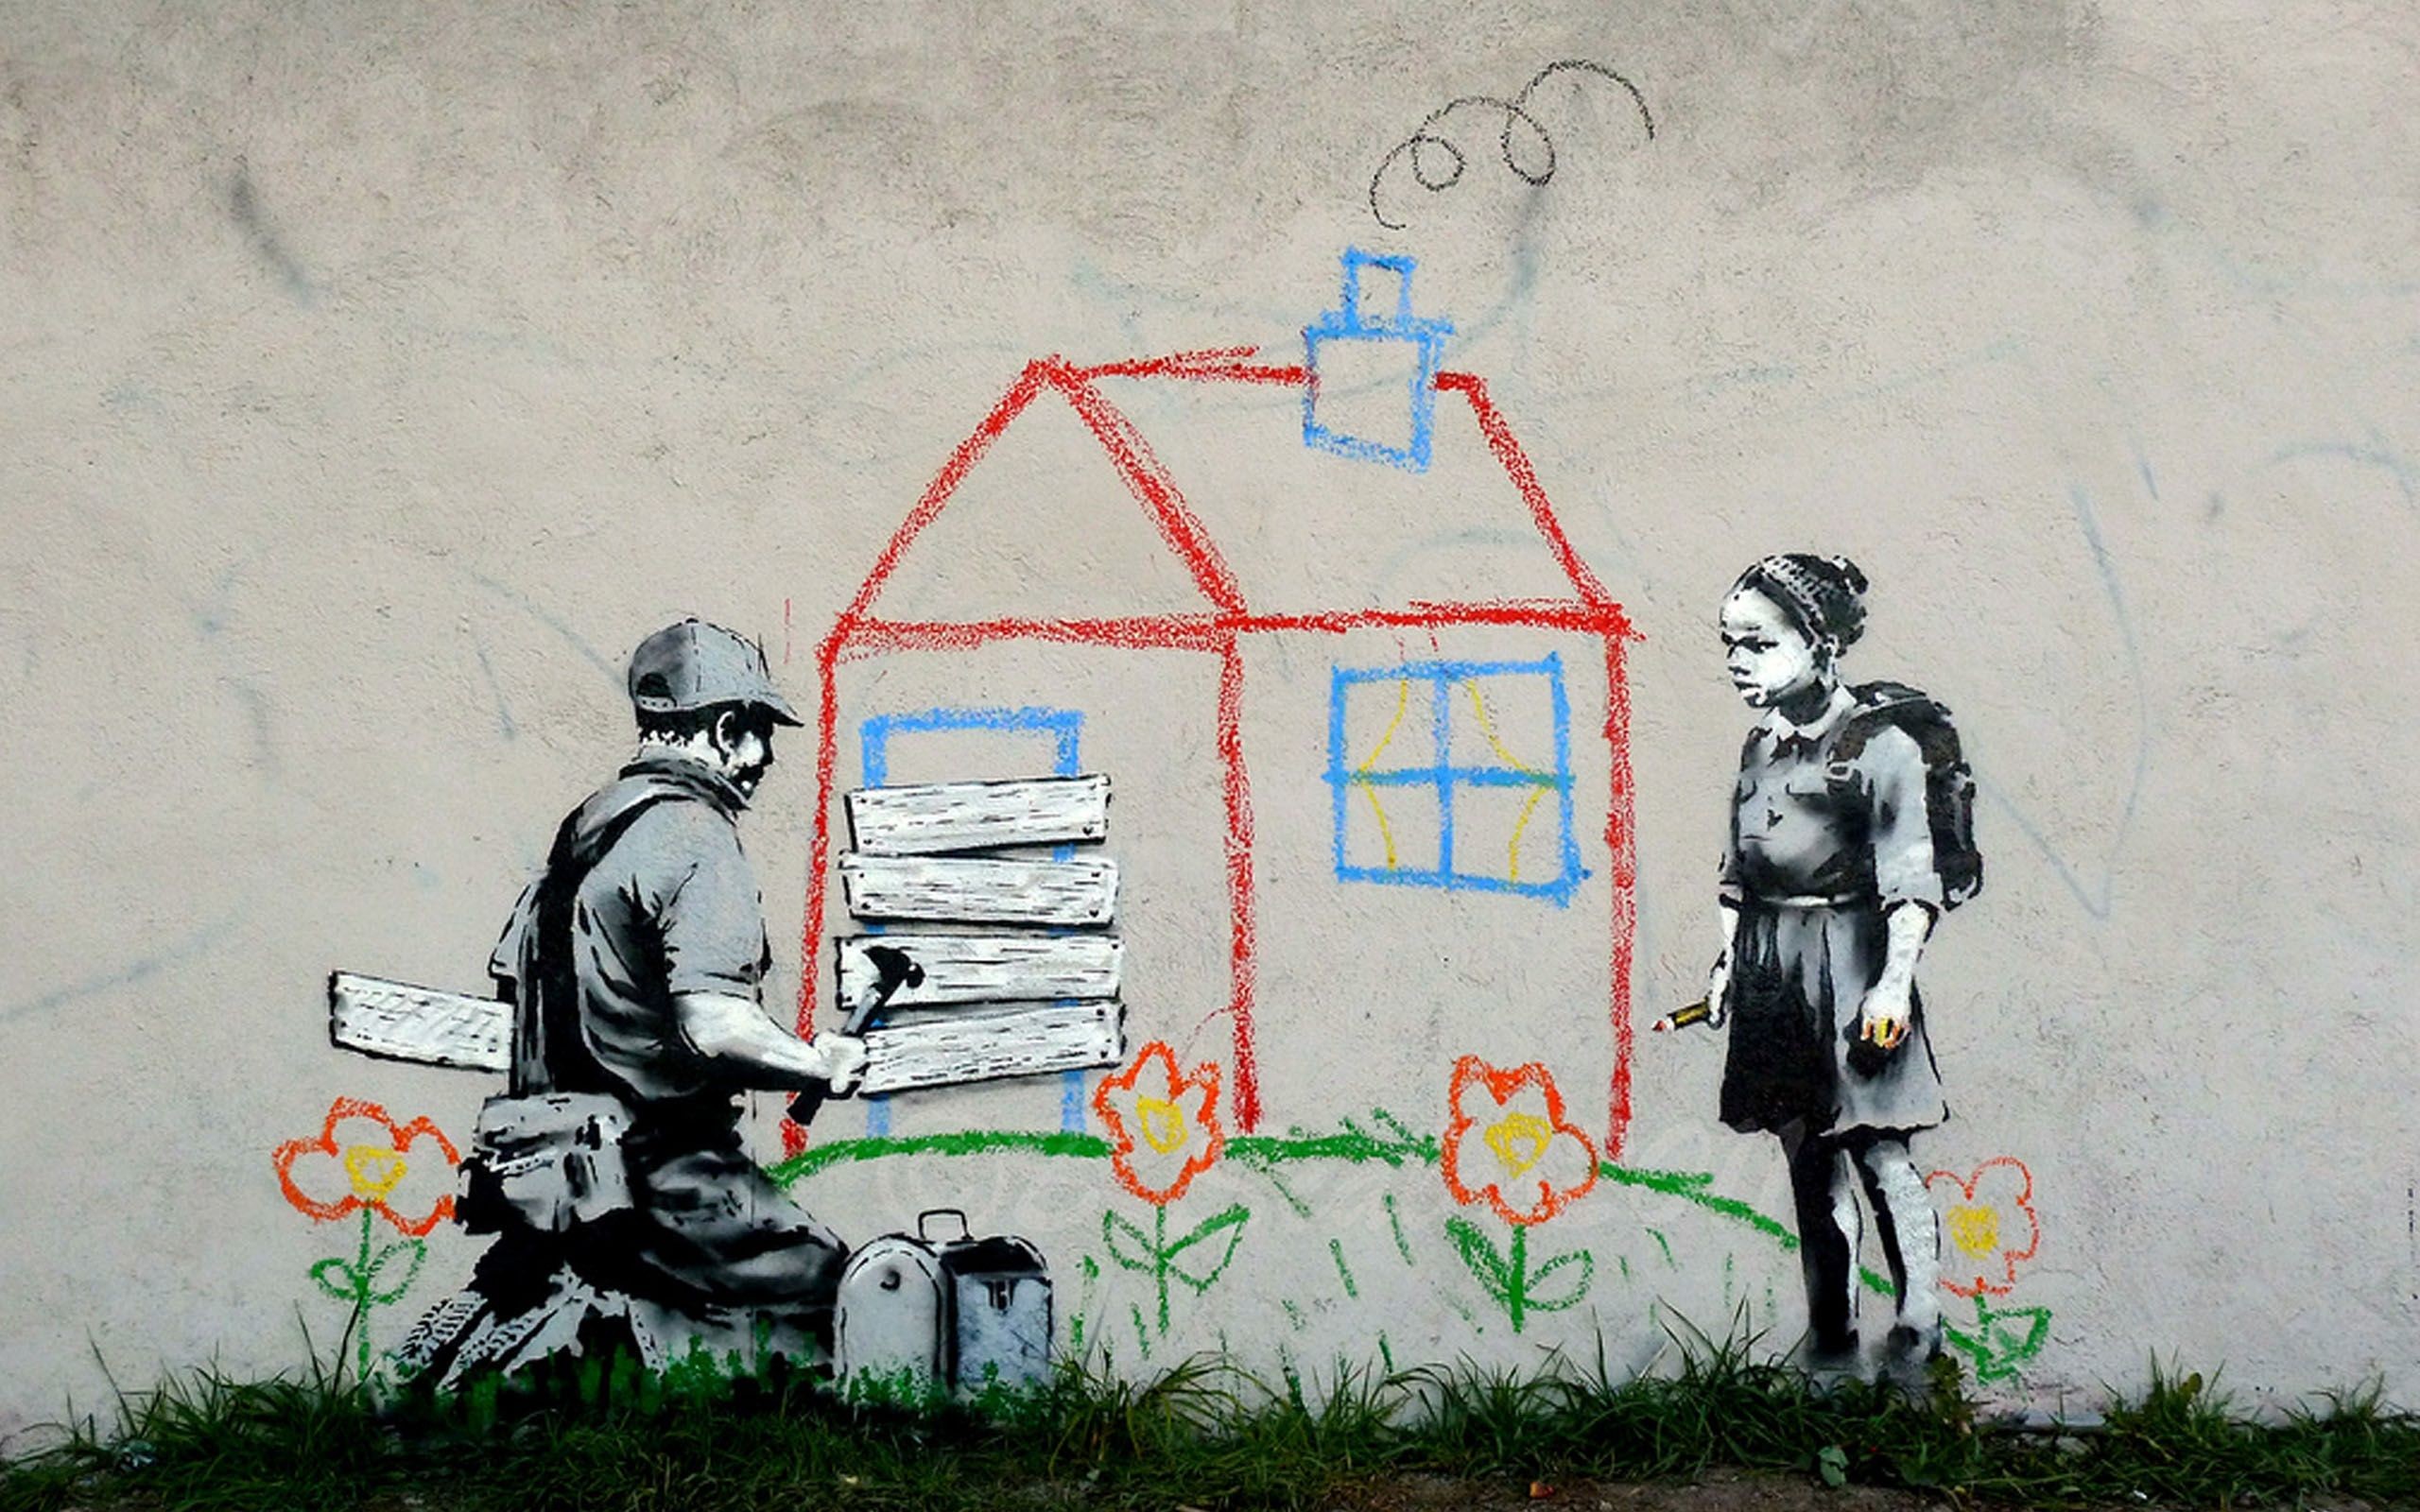 2560x1600 Volunteers Painting Banksy wallpapers and images - wallpapers .